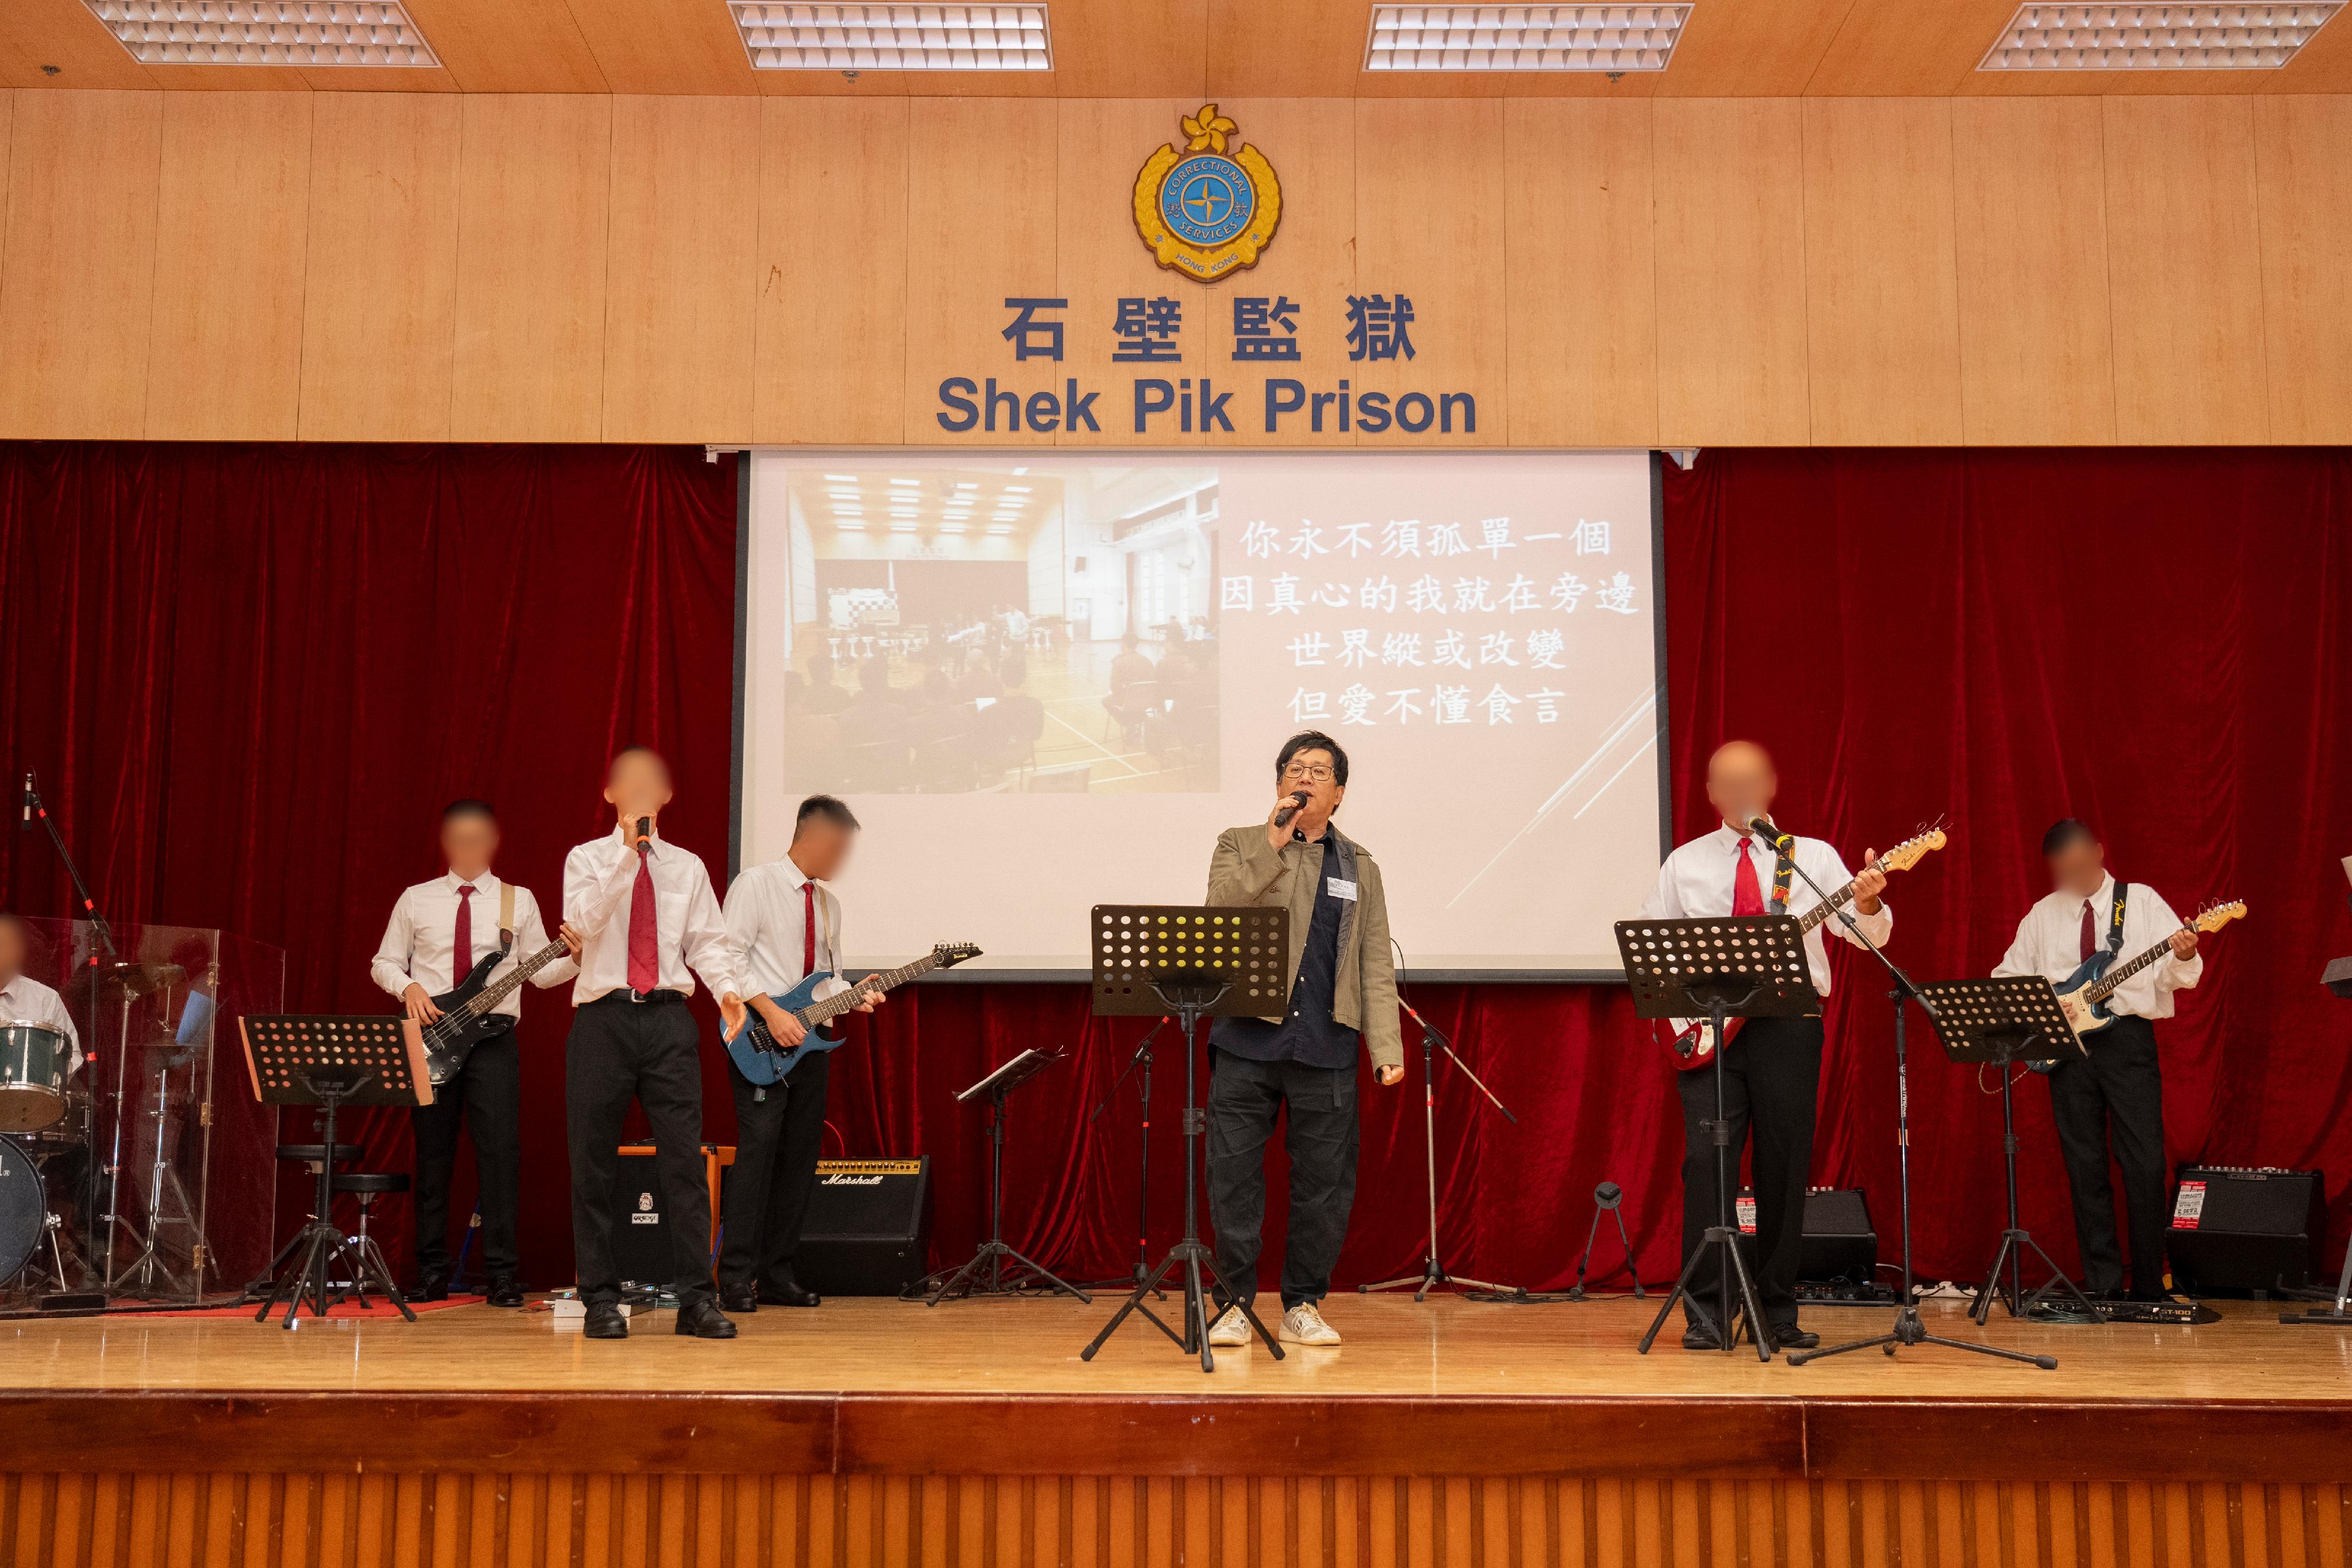 Persons in custody at Shek Pik Prison of the Correctional Services Department were presented with certificates at a ceremony today (November 23) in recognition of their study efforts and academic achievements. Photo shows renowned singer Anthony Lun (third right) partnering with persons in custody to perform live music onstage.